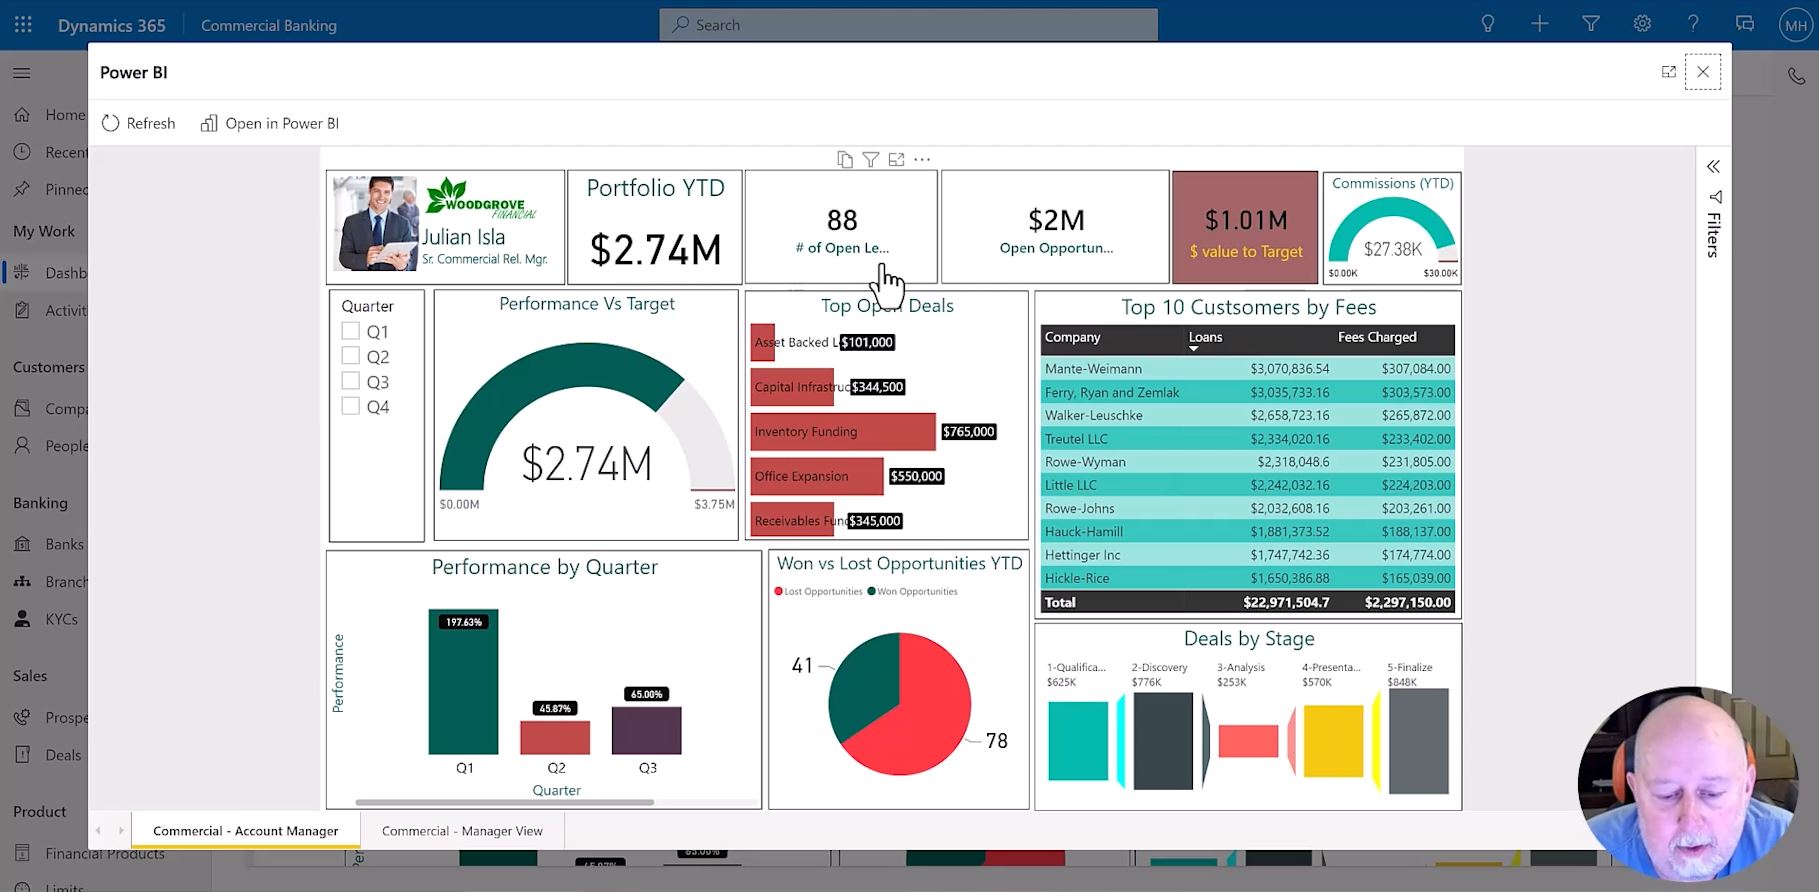 Commercial Banking Dashboard Image